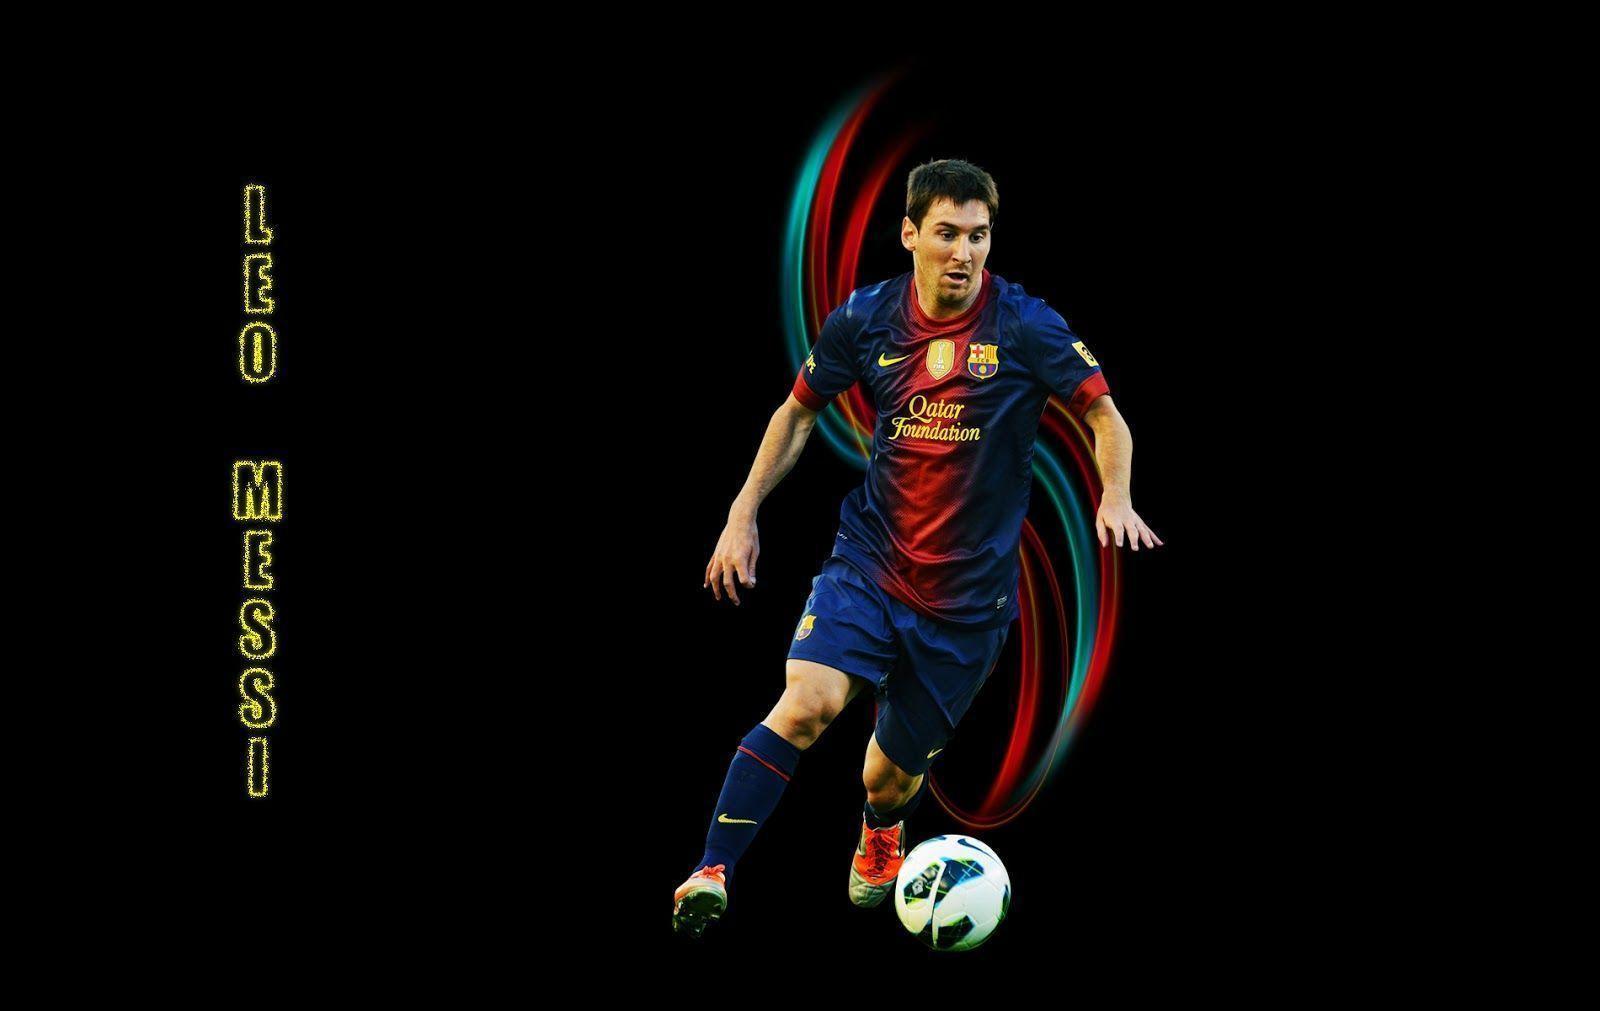 Image For > Lionel Messi 2013 Wallpapers Hd 1080p